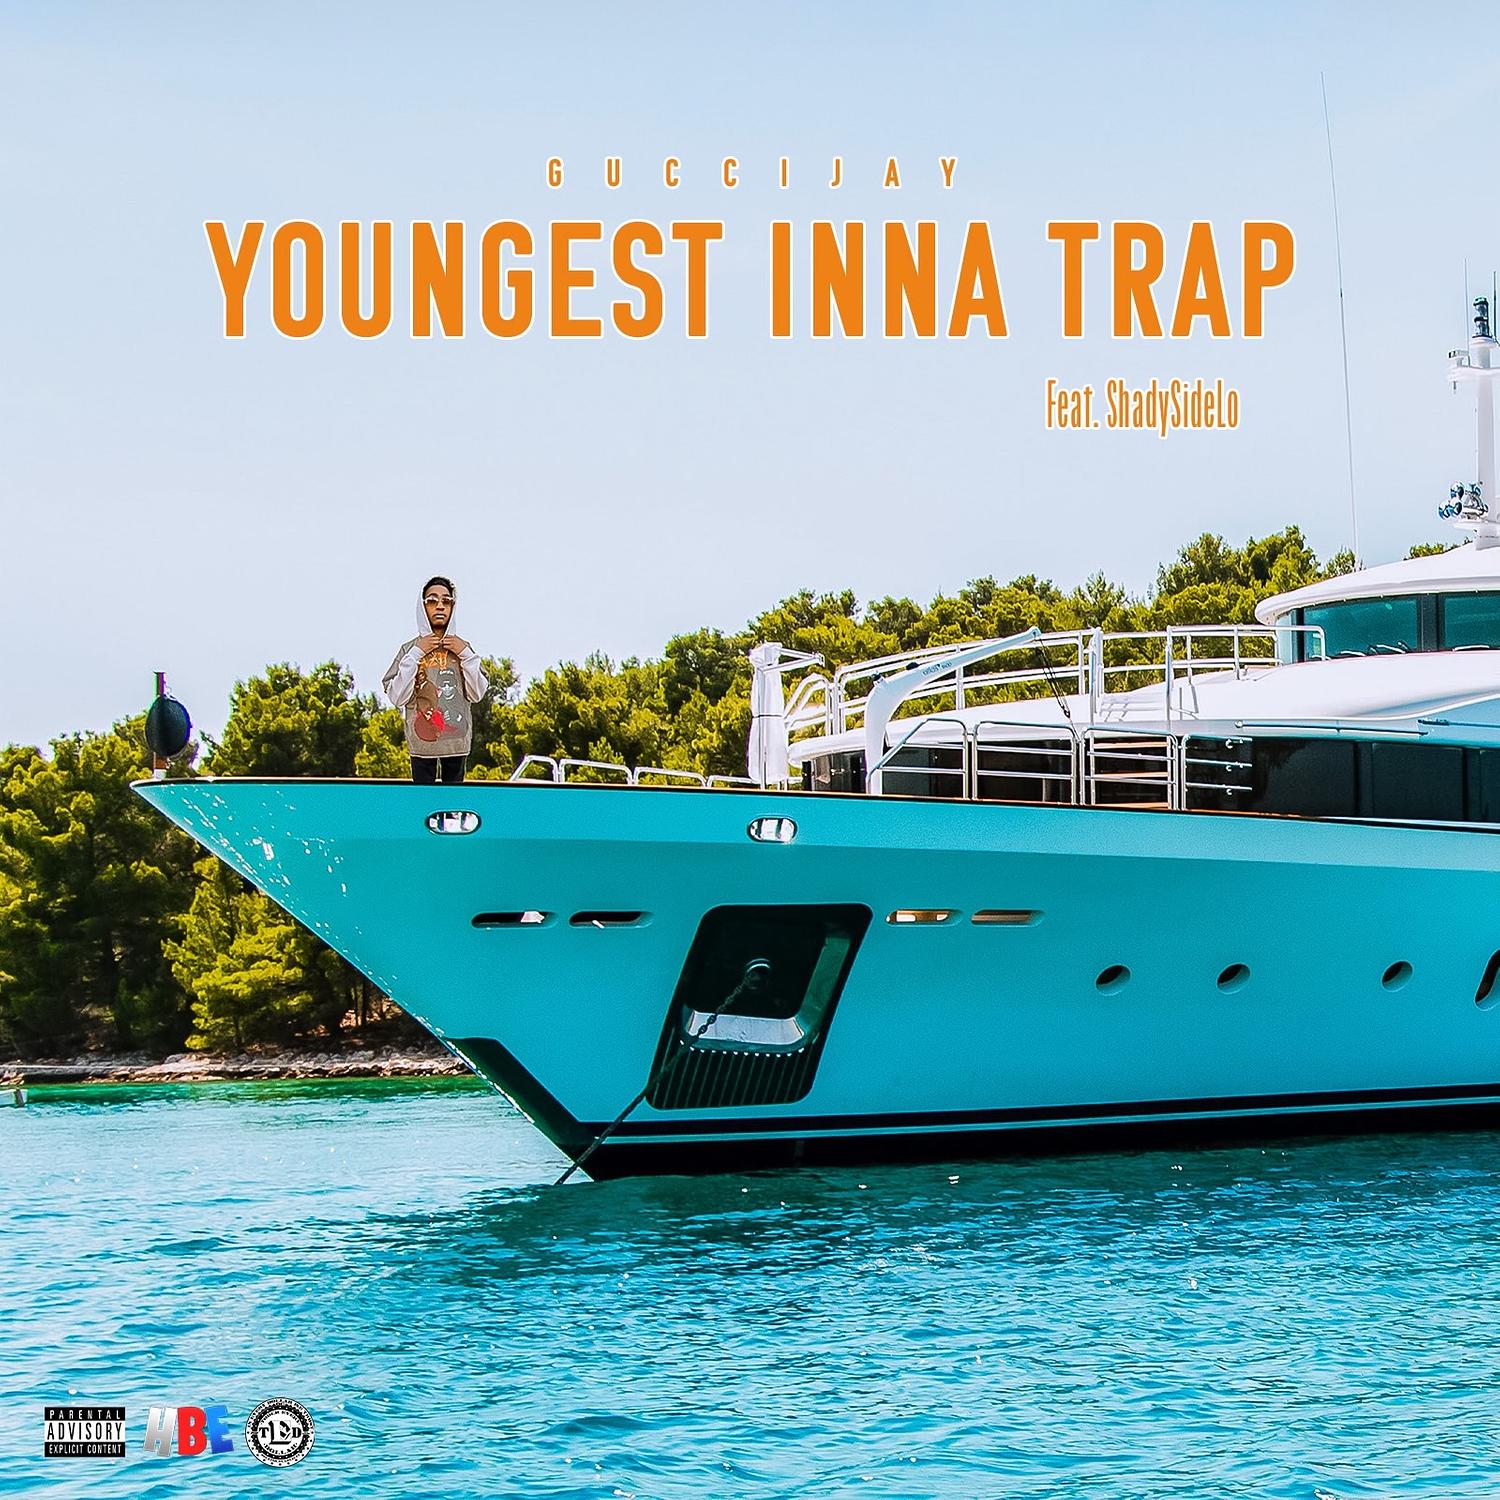 GucciJay - Youngest Inna Trap